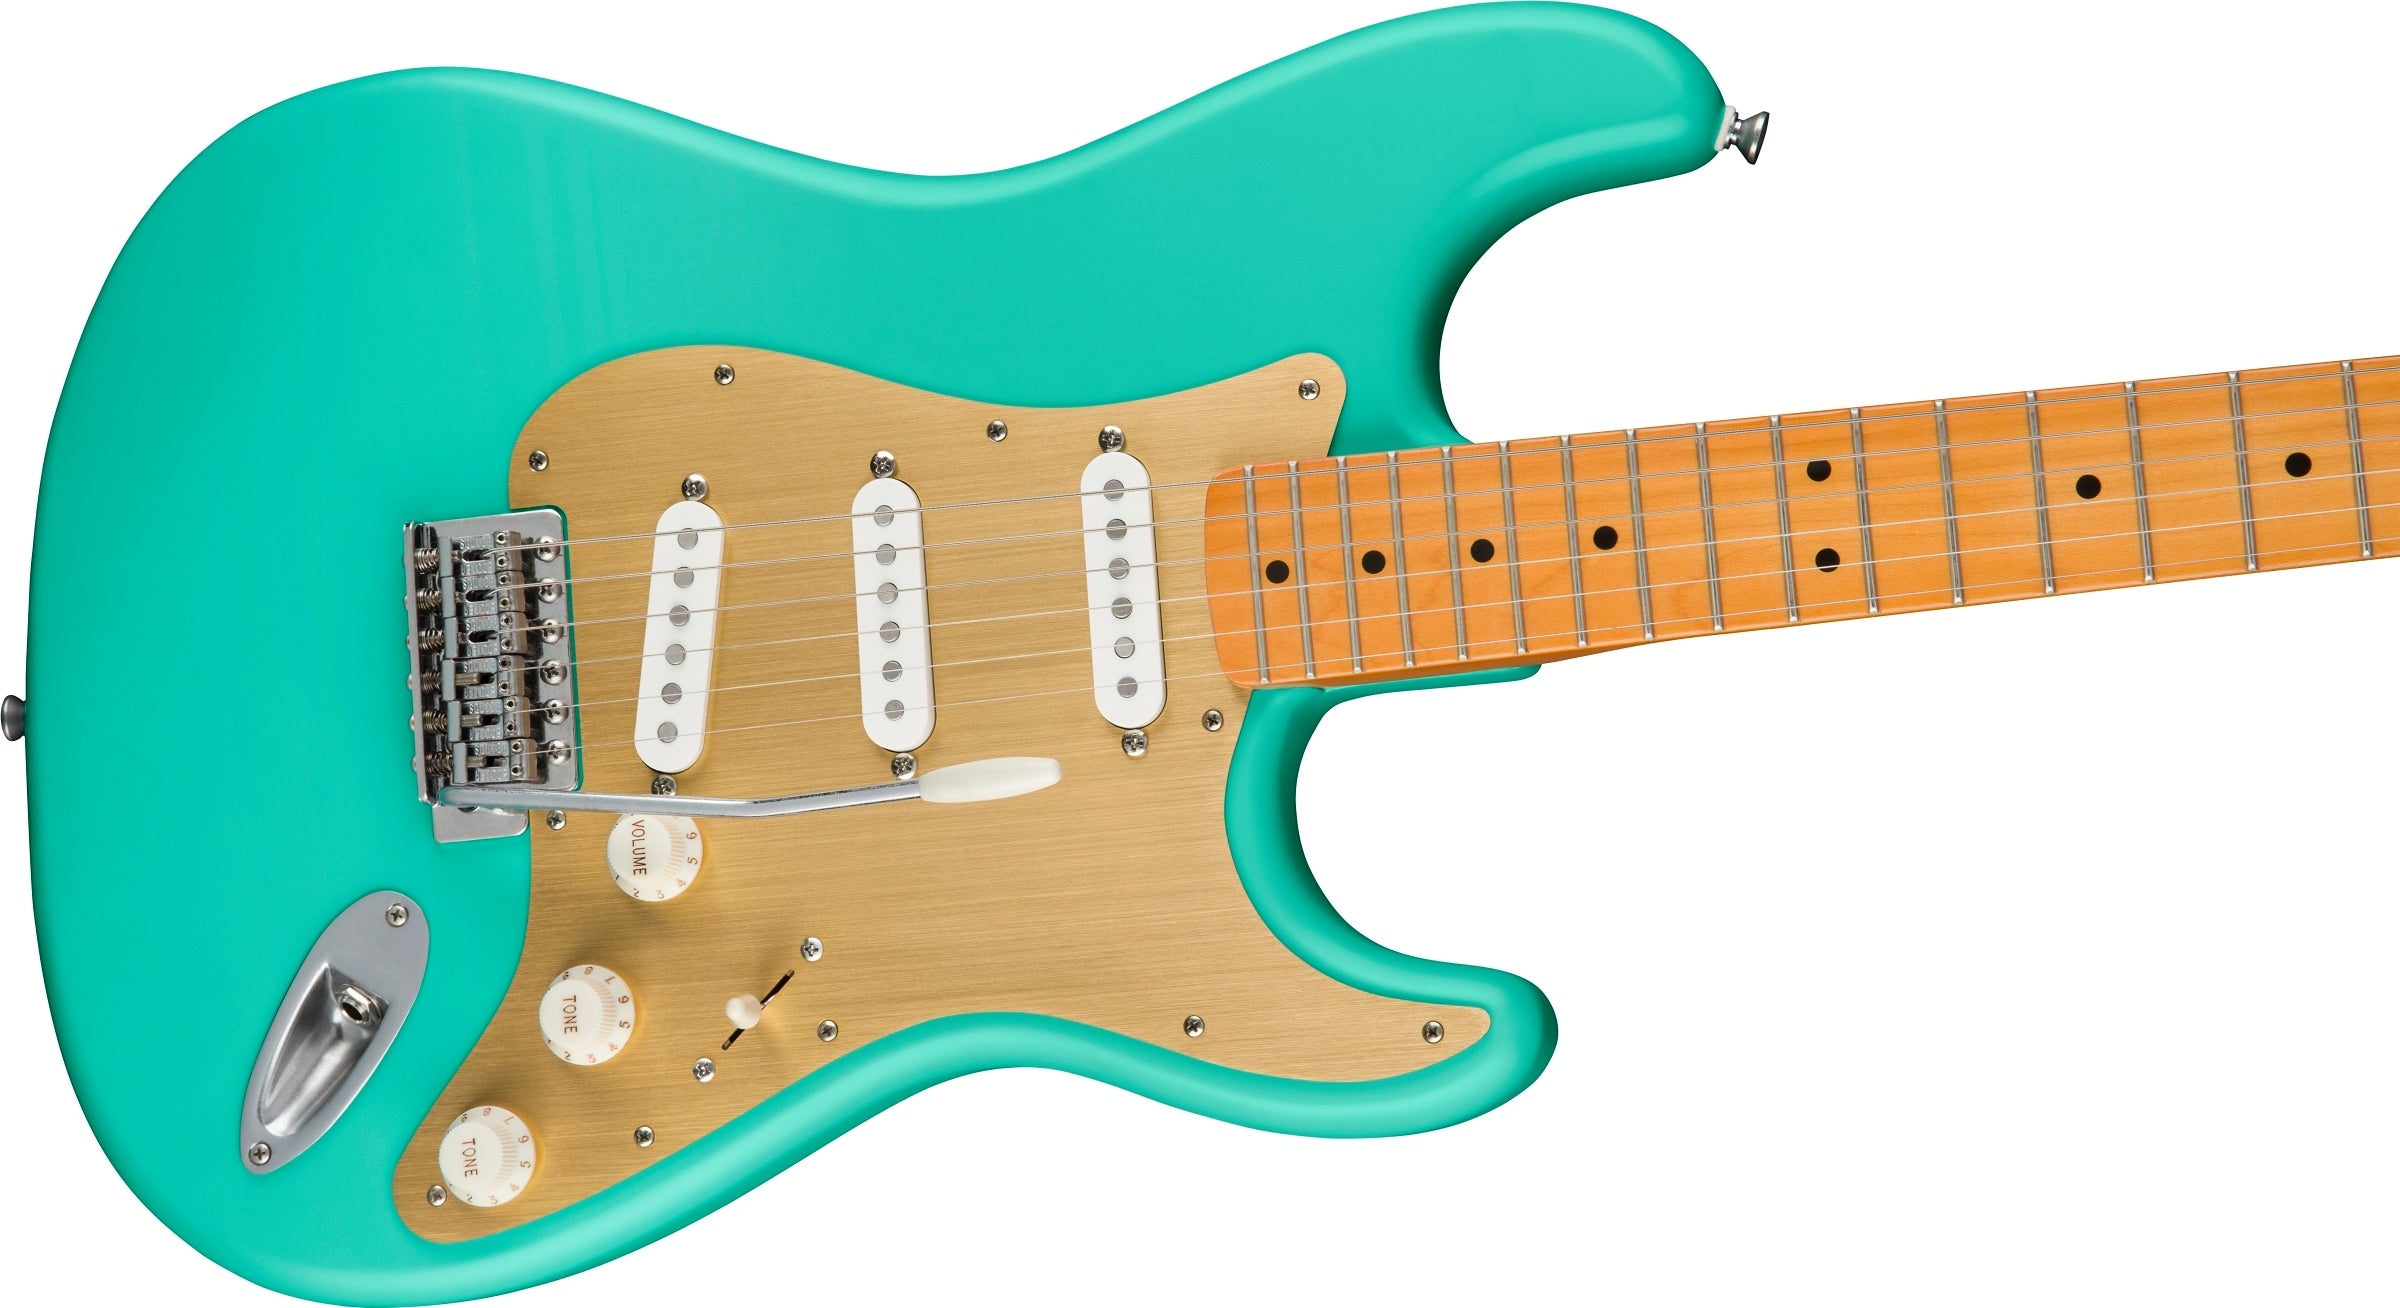 Squier 40th Anniversary Stratocaster Vintage Edition Electric Guitar - Satin Seafoam Green